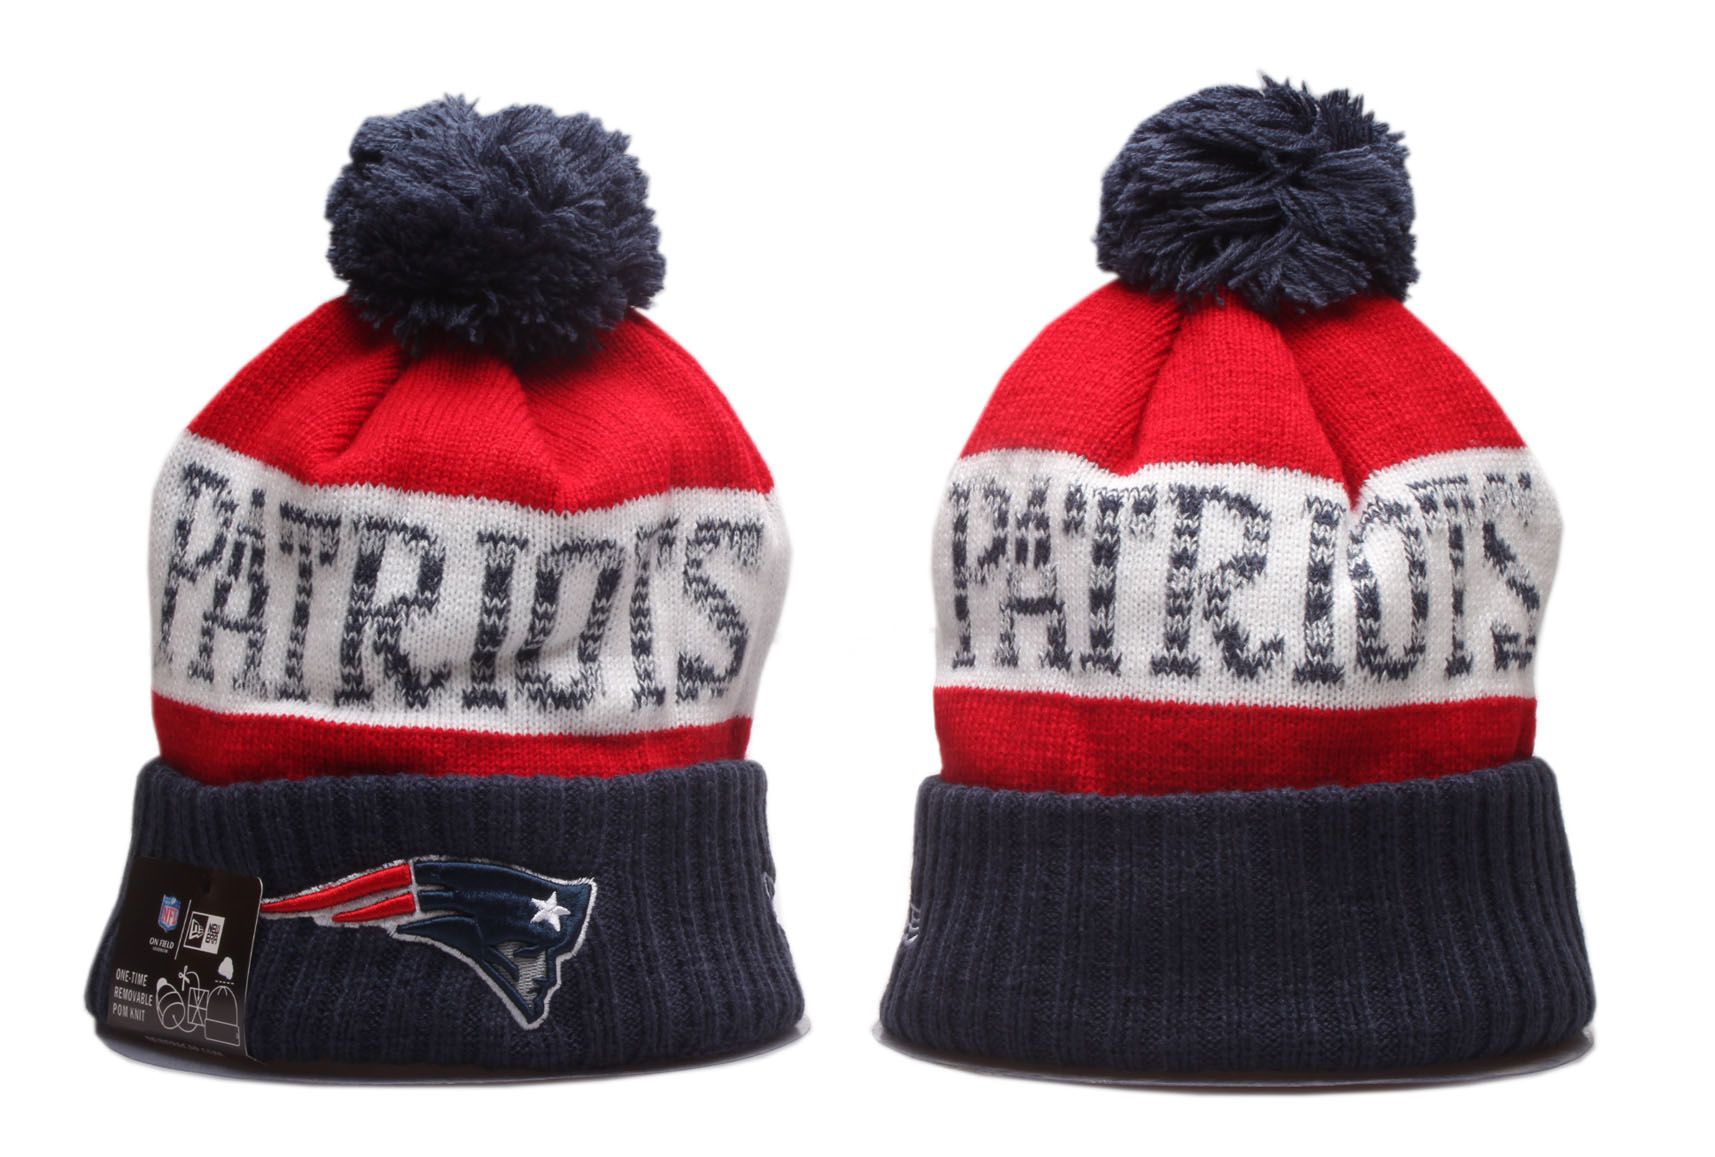 2023 NFL New England Patriots beanies ypmy2